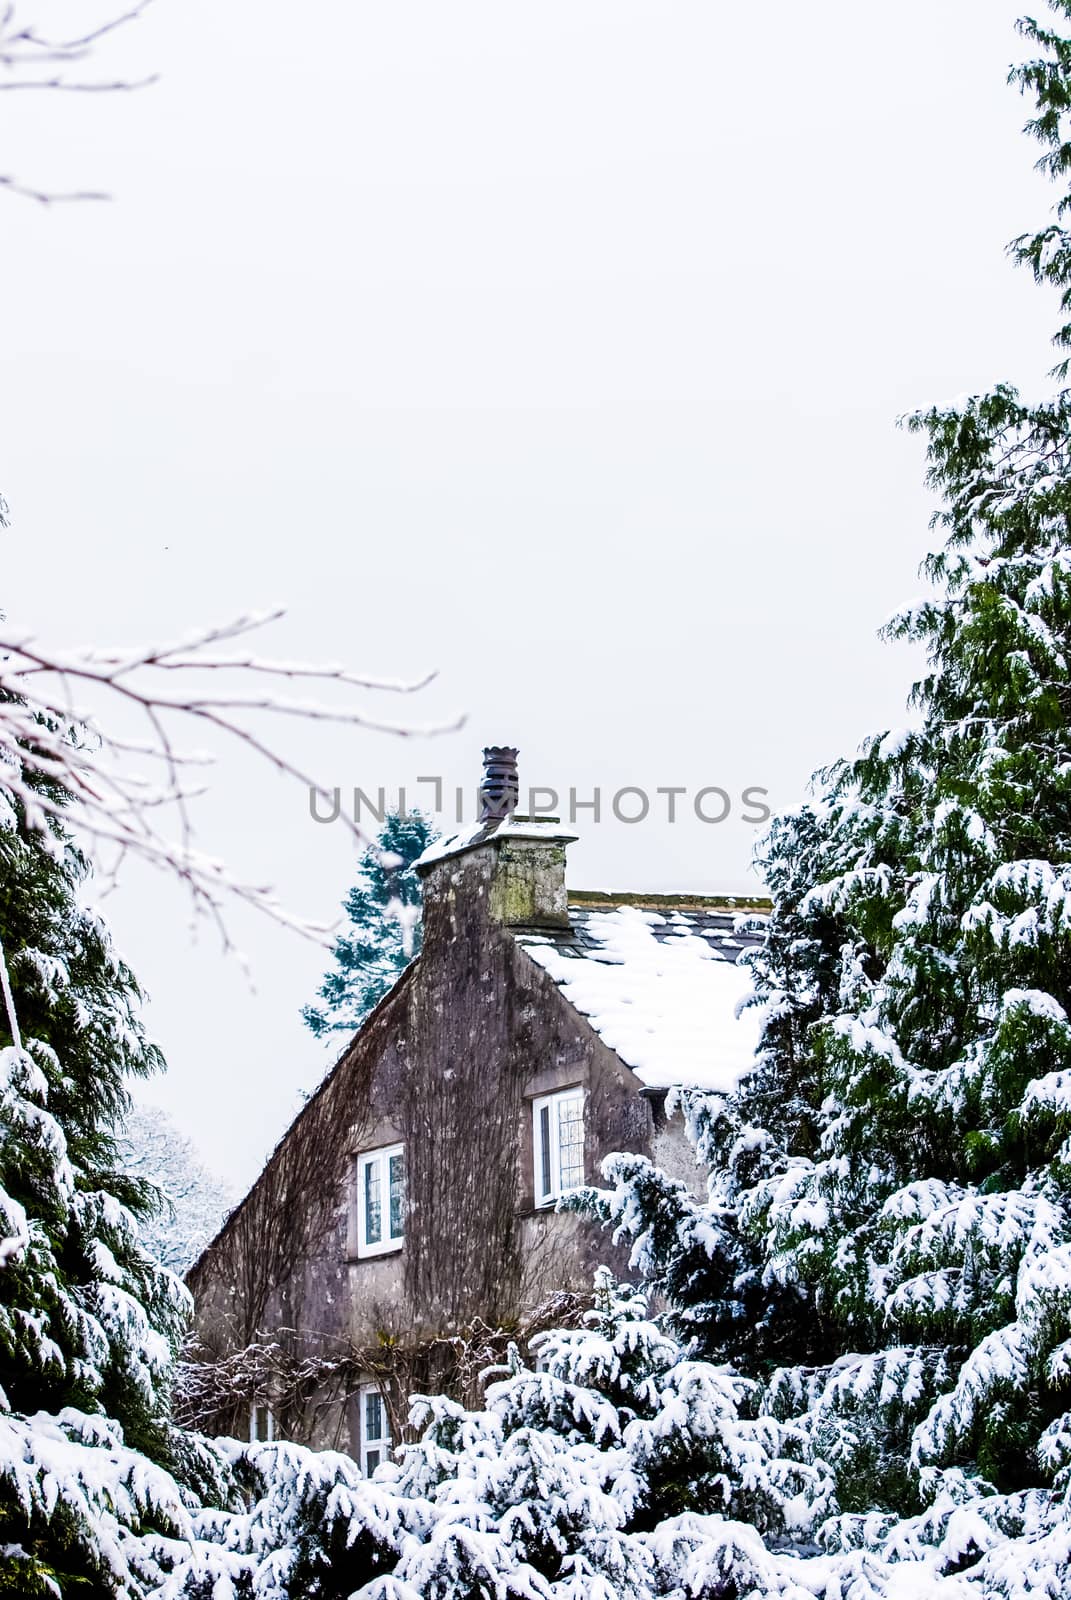 House in a snowy forest In Lake District Cumbria UK by paddythegolfer